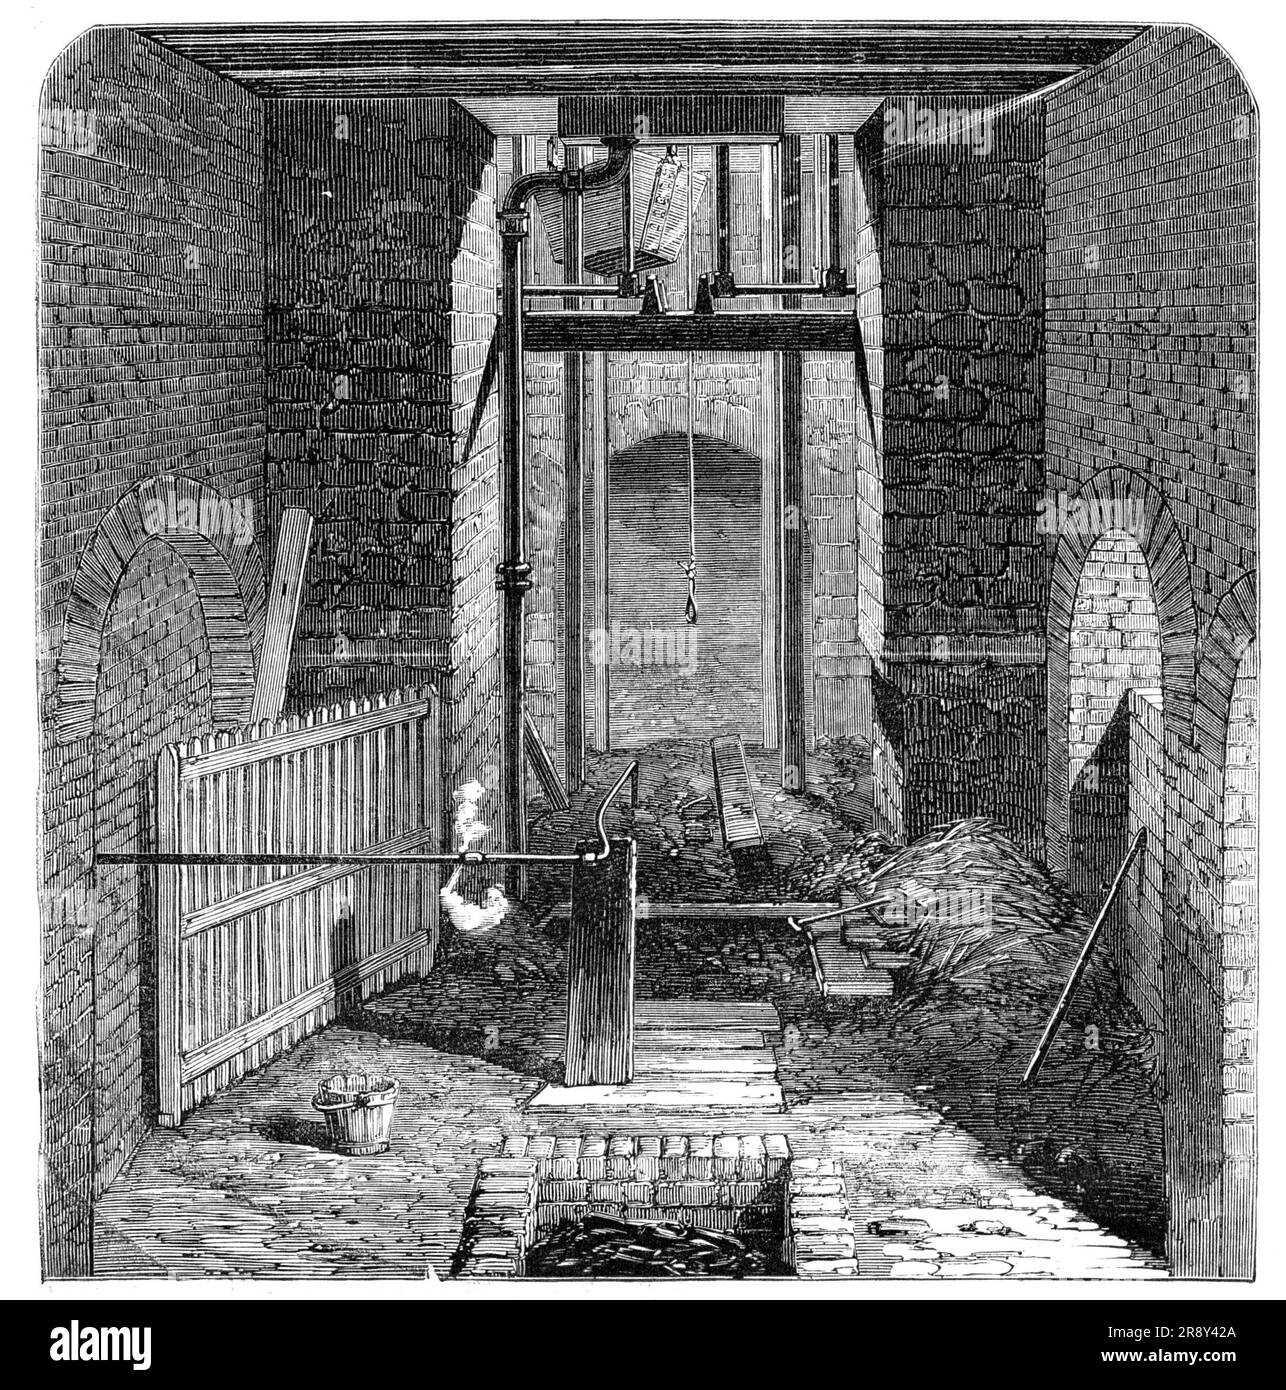 The Lund Hill Colliery Explosion: Mouth of the Downcast Shaft, 1857. Preparations to recover bodies after mining disaster in Barnsley. 'The Illustration represents the entrance to the downcast shaft, after the mouth had been closed. The iron basket in which the miners made their descent is suspended immediately over it, and a jet of steam is being forced through a pipe connected with the boiler into the pit, for the purpose of extinguishing the fire. The brick tank in the foreground of the sketch was filled with charcoal, preparatory to making carbonic acid gas, for the same purpose; but these Stock Photo